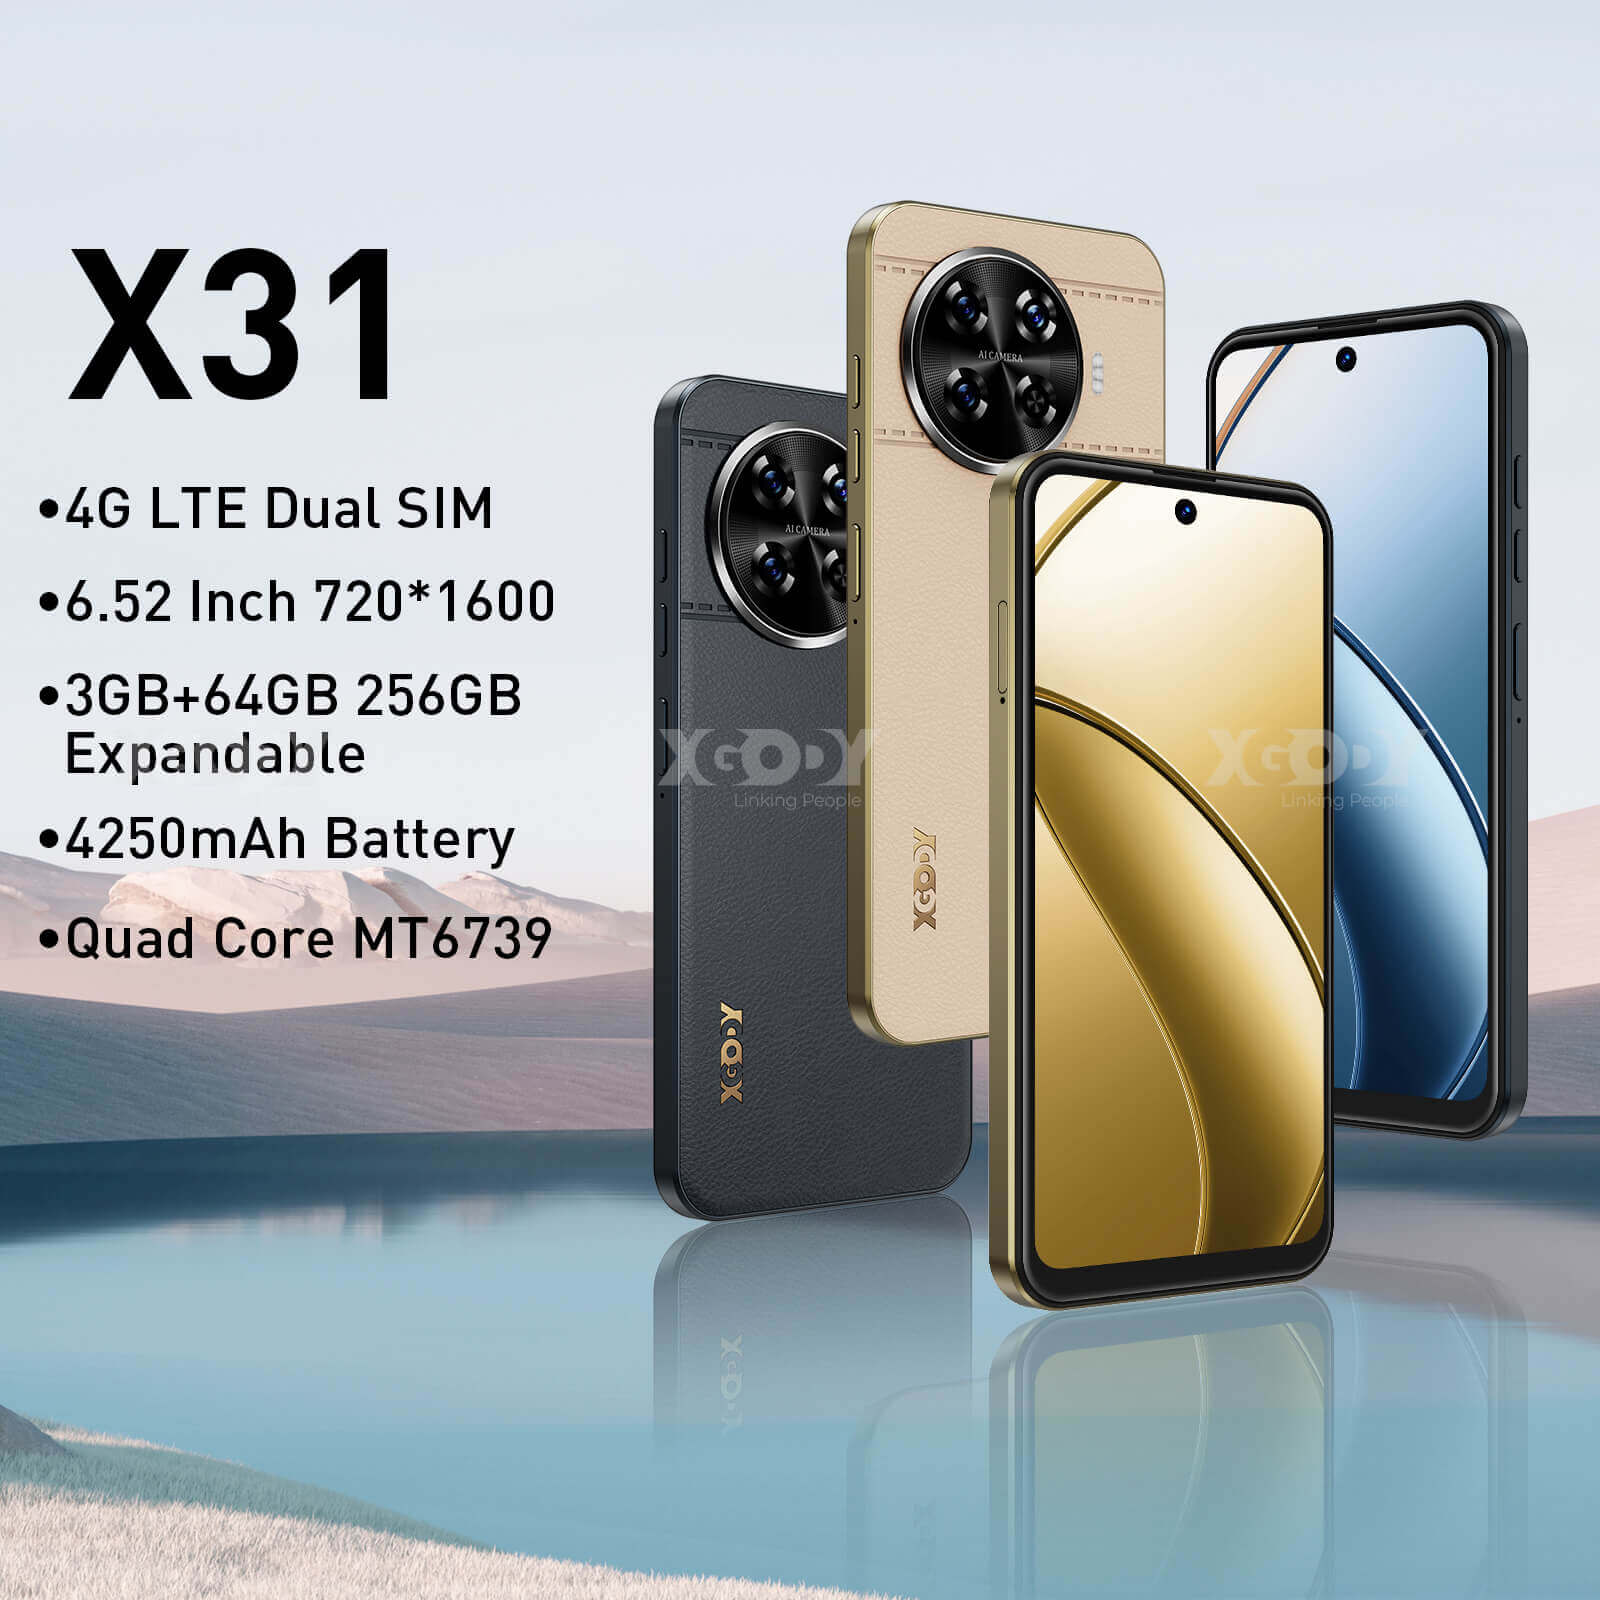 XGODY X31 6.5" 4G LTE Smartphone, Supports Face Unlocking, Built-in 3+64G Memory